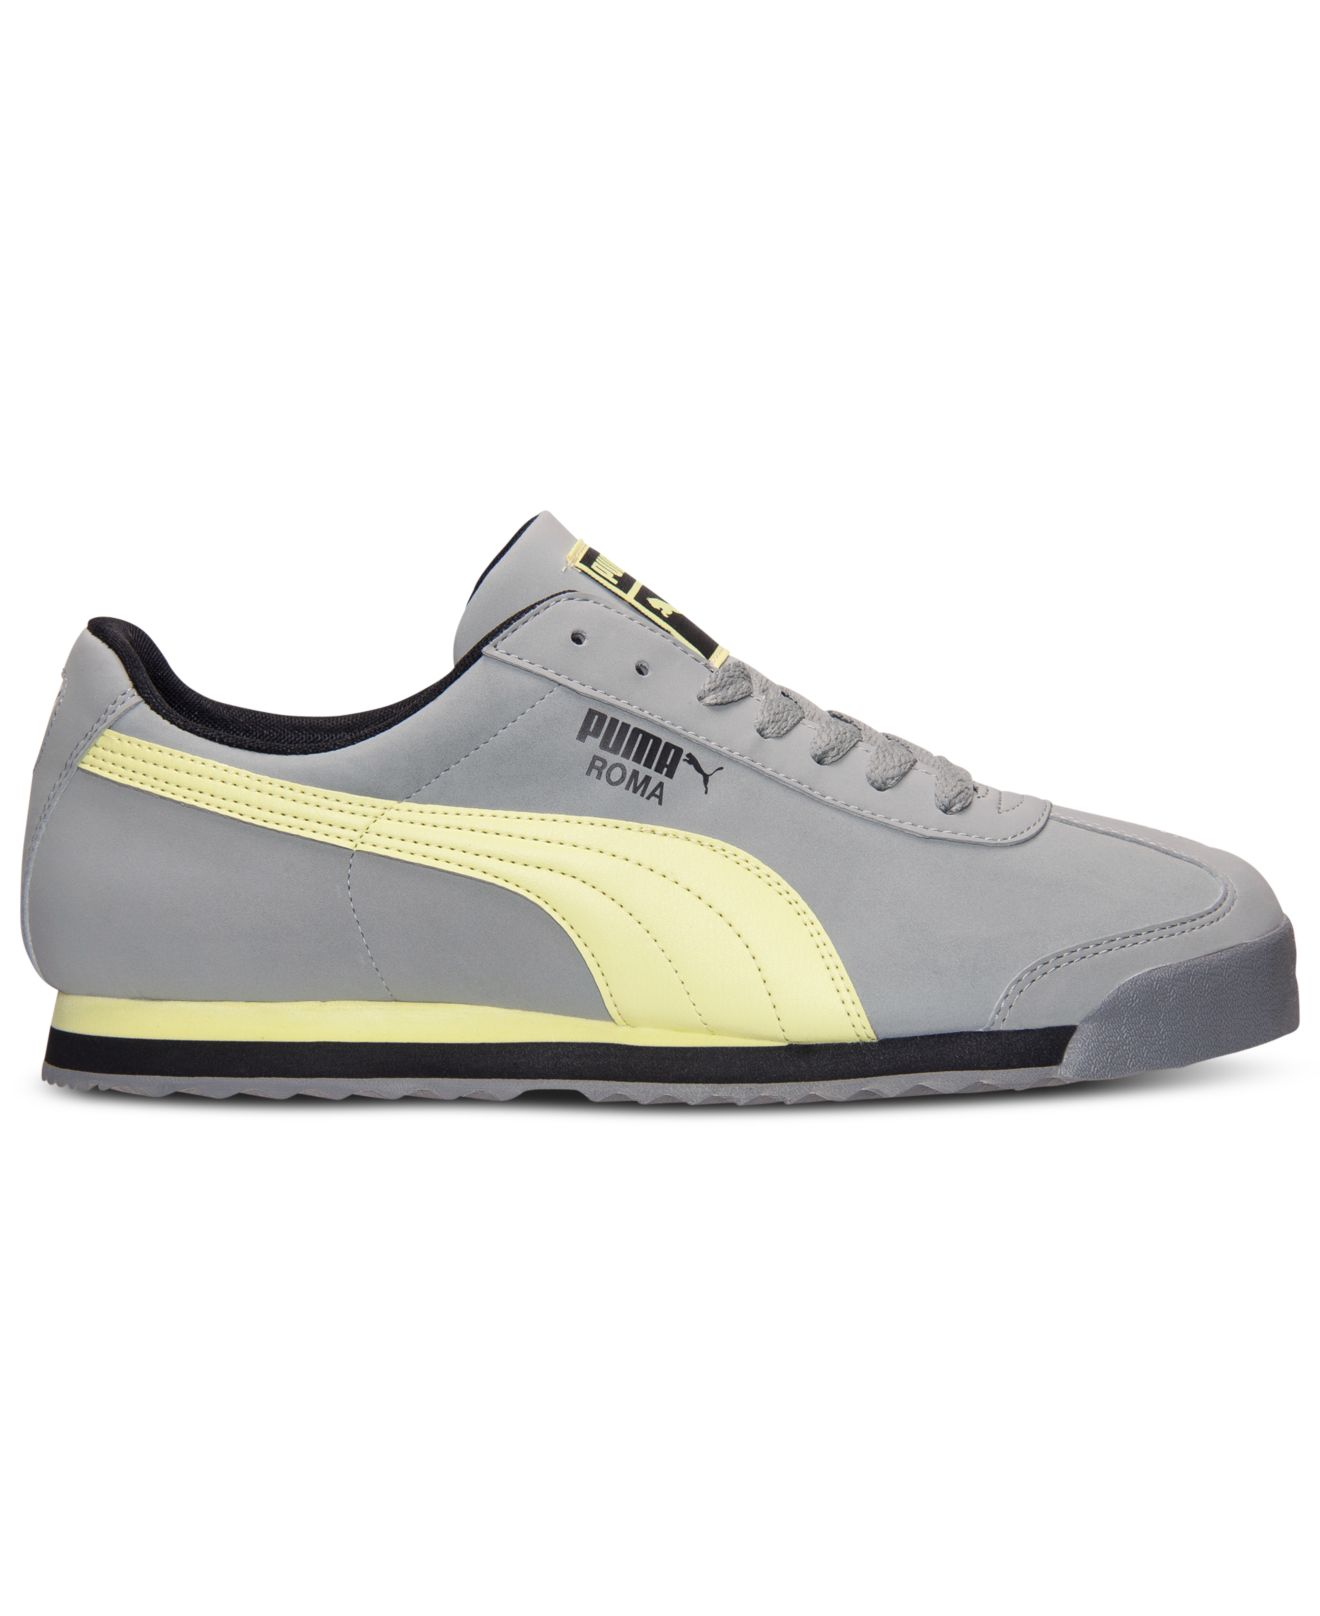 Lyst - Puma Men's Roma Sl Nubuck 2 Casual Sneakers From Finish Line in ...